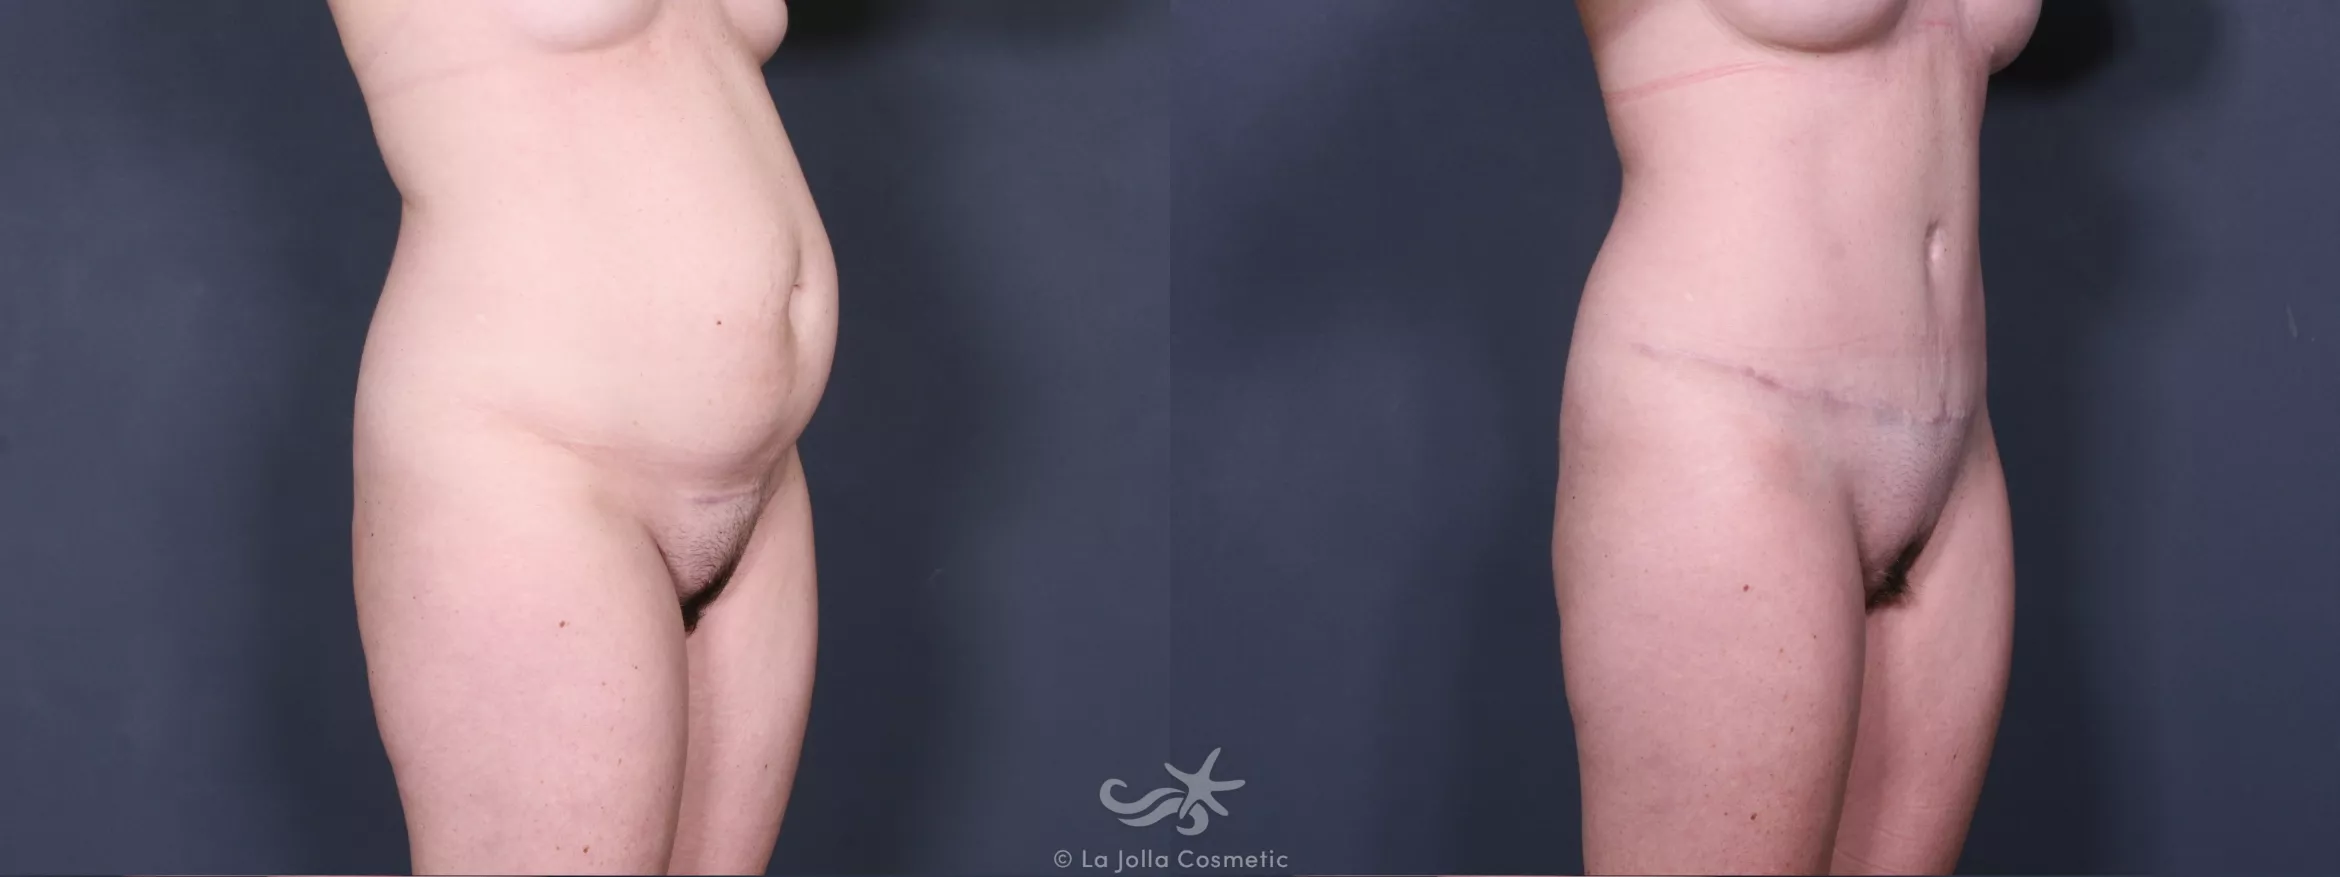 Before & After Liposuction Result 390 Right Oblique View in San Diego, CA